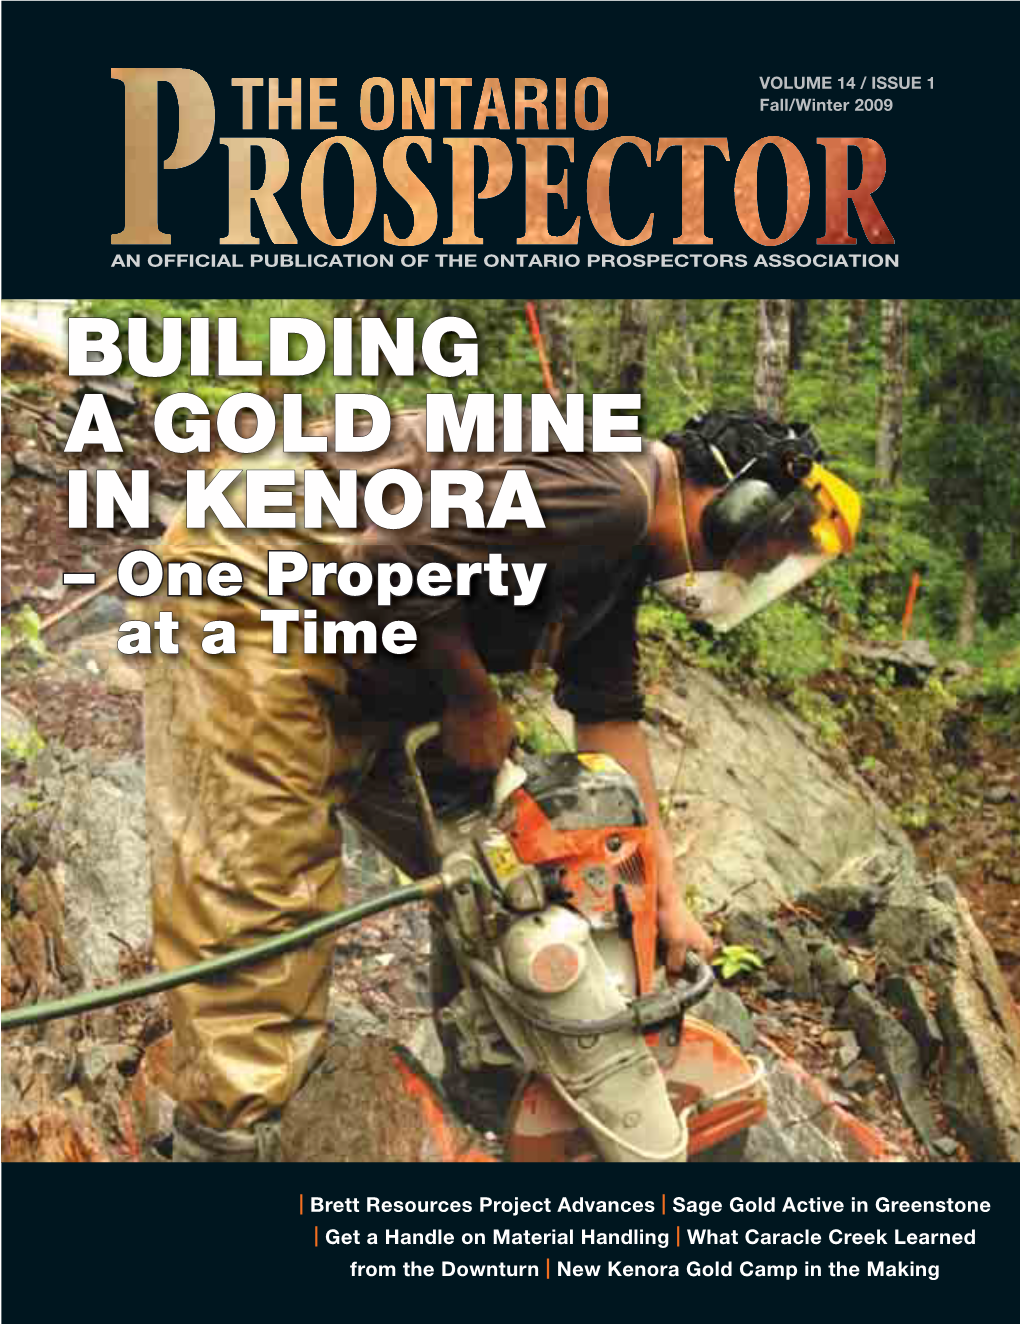 Building a Gold Mine in Kenora